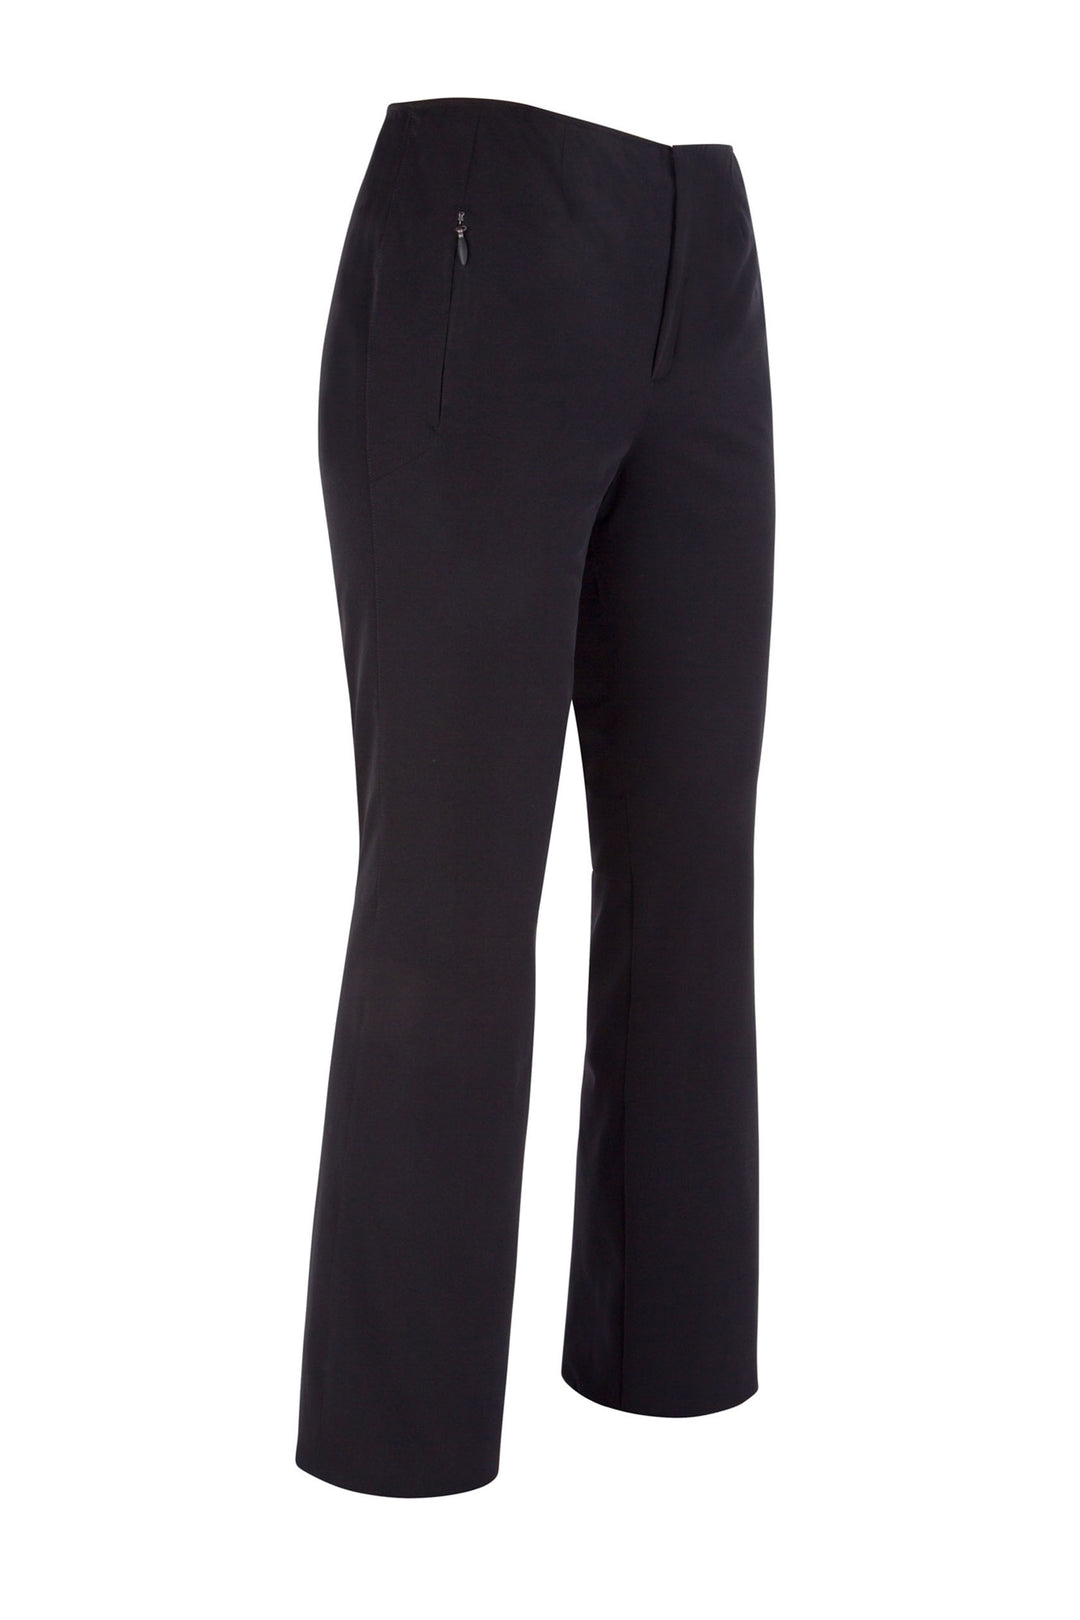 Women's Thermal Stretch Jeans N-10